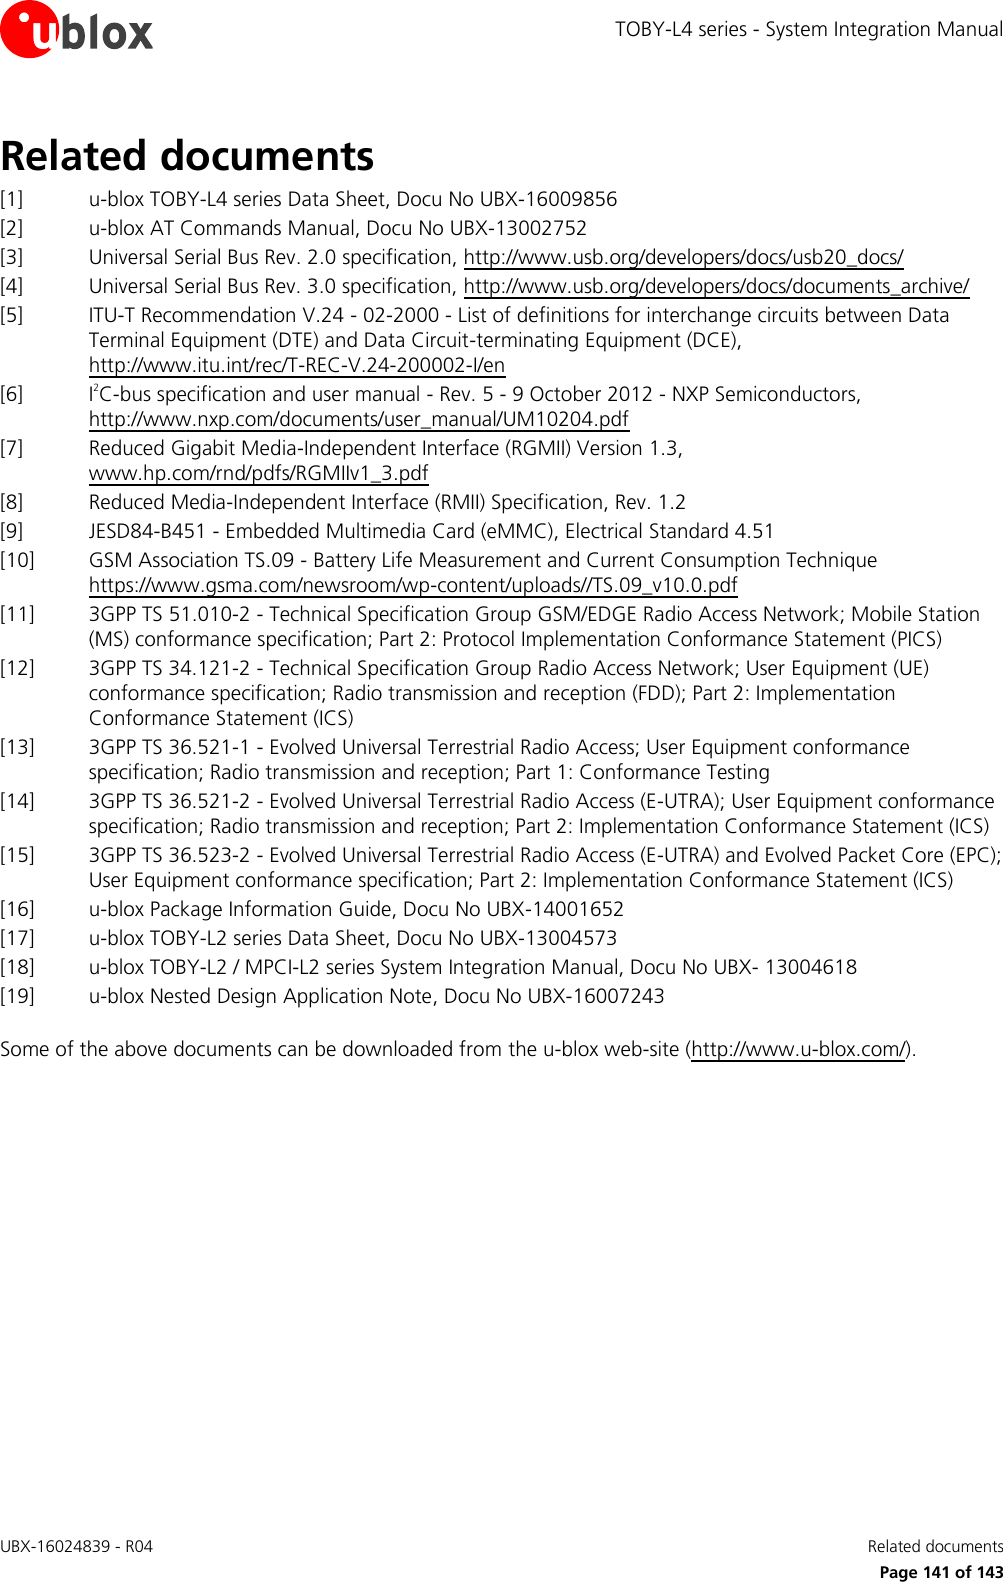 TOBY-L4 series - System Integration Manual UBX-16024839 - R04    Related documents      Page 141 of 143 Related documents [1] u-blox TOBY-L4 series Data Sheet, Docu No UBX-16009856 [2] u-blox AT Commands Manual, Docu No UBX-13002752 [3] Universal Serial Bus Rev. 2.0 specification, http://www.usb.org/developers/docs/usb20_docs/  [4] Universal Serial Bus Rev. 3.0 specification, http://www.usb.org/developers/docs/documents_archive/ [5] ITU-T Recommendation V.24 - 02-2000 - List of definitions for interchange circuits between Data Terminal Equipment (DTE) and Data Circuit-terminating Equipment (DCE), http://www.itu.int/rec/T-REC-V.24-200002-I/en [6] I2C-bus specification and user manual - Rev. 5 - 9 October 2012 - NXP Semiconductors, http://www.nxp.com/documents/user_manual/UM10204.pdf [7] Reduced Gigabit Media-Independent Interface (RGMII) Version 1.3, www.hp.com/rnd/pdfs/RGMIIv1_3.pdf   [8] Reduced Media-Independent Interface (RMII) Specification, Rev. 1.2 [9] JESD84-B451 - Embedded Multimedia Card (eMMC), Electrical Standard 4.51 [10] GSM Association TS.09 - Battery Life Measurement and Current Consumption Technique https://www.gsma.com/newsroom/wp-content/uploads//TS.09_v10.0.pdf  [11] 3GPP TS 51.010-2 - Technical Specification Group GSM/EDGE Radio Access Network; Mobile Station (MS) conformance specification; Part 2: Protocol Implementation Conformance Statement (PICS) [12] 3GPP TS 34.121-2 - Technical Specification Group Radio Access Network; User Equipment (UE) conformance specification; Radio transmission and reception (FDD); Part 2: Implementation Conformance Statement (ICS) [13] 3GPP TS 36.521-1 - Evolved Universal Terrestrial Radio Access; User Equipment conformance specification; Radio transmission and reception; Part 1: Conformance Testing [14] 3GPP TS 36.521-2 - Evolved Universal Terrestrial Radio Access (E-UTRA); User Equipment conformance specification; Radio transmission and reception; Part 2: Implementation Conformance Statement (ICS) [15] 3GPP TS 36.523-2 - Evolved Universal Terrestrial Radio Access (E-UTRA) and Evolved Packet Core (EPC); User Equipment conformance specification; Part 2: Implementation Conformance Statement (ICS) [16] u-blox Package Information Guide, Docu No UBX-14001652 [17] u-blox TOBY-L2 series Data Sheet, Docu No UBX-13004573 [18] u-blox TOBY-L2 / MPCI-L2 series System Integration Manual, Docu No UBX- 13004618 [19] u-blox Nested Design Application Note, Docu No UBX-16007243  Some of the above documents can be downloaded from the u-blox web-site (http://www.u-blox.com/). 